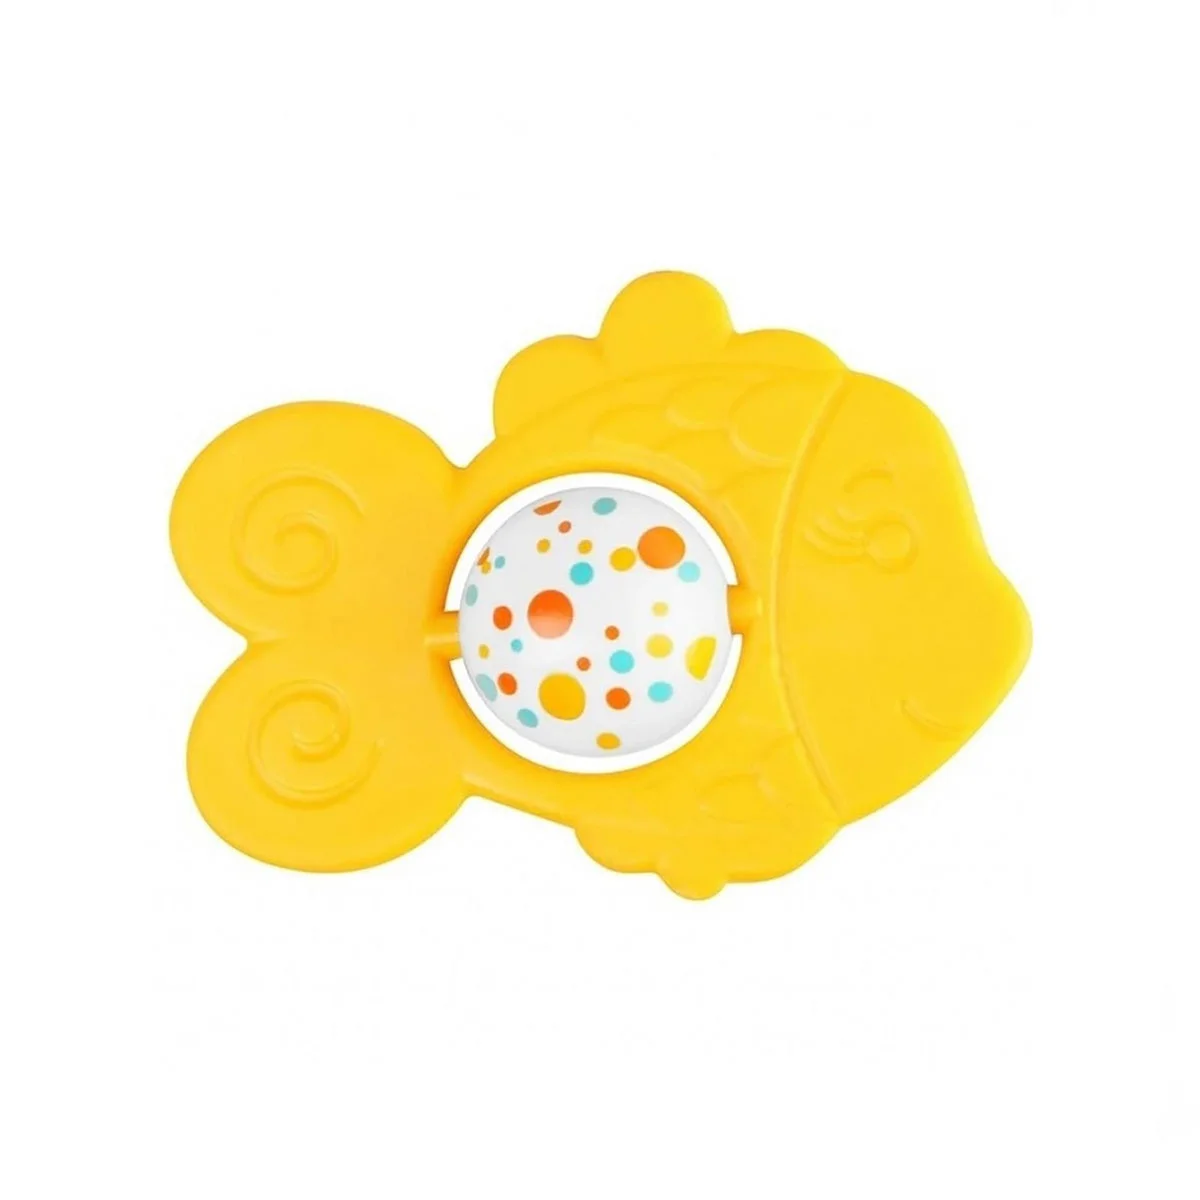 LC friend fish teether and rattle